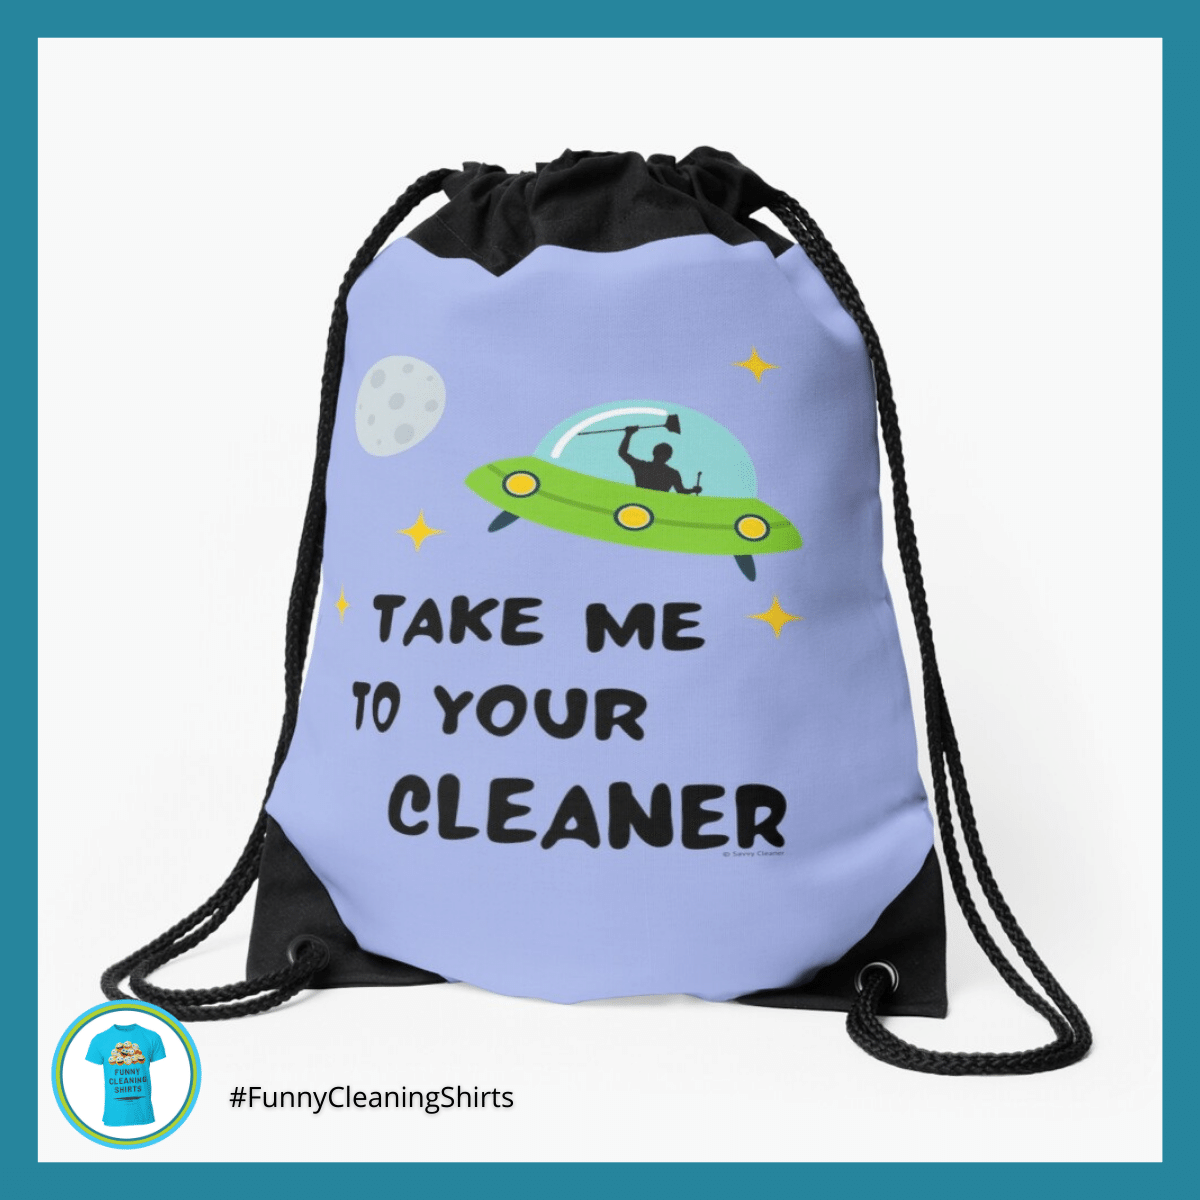 Take Me to Your Cleaner Savvy Cleaner Funny Cleaning Shirts Drawstring Bag